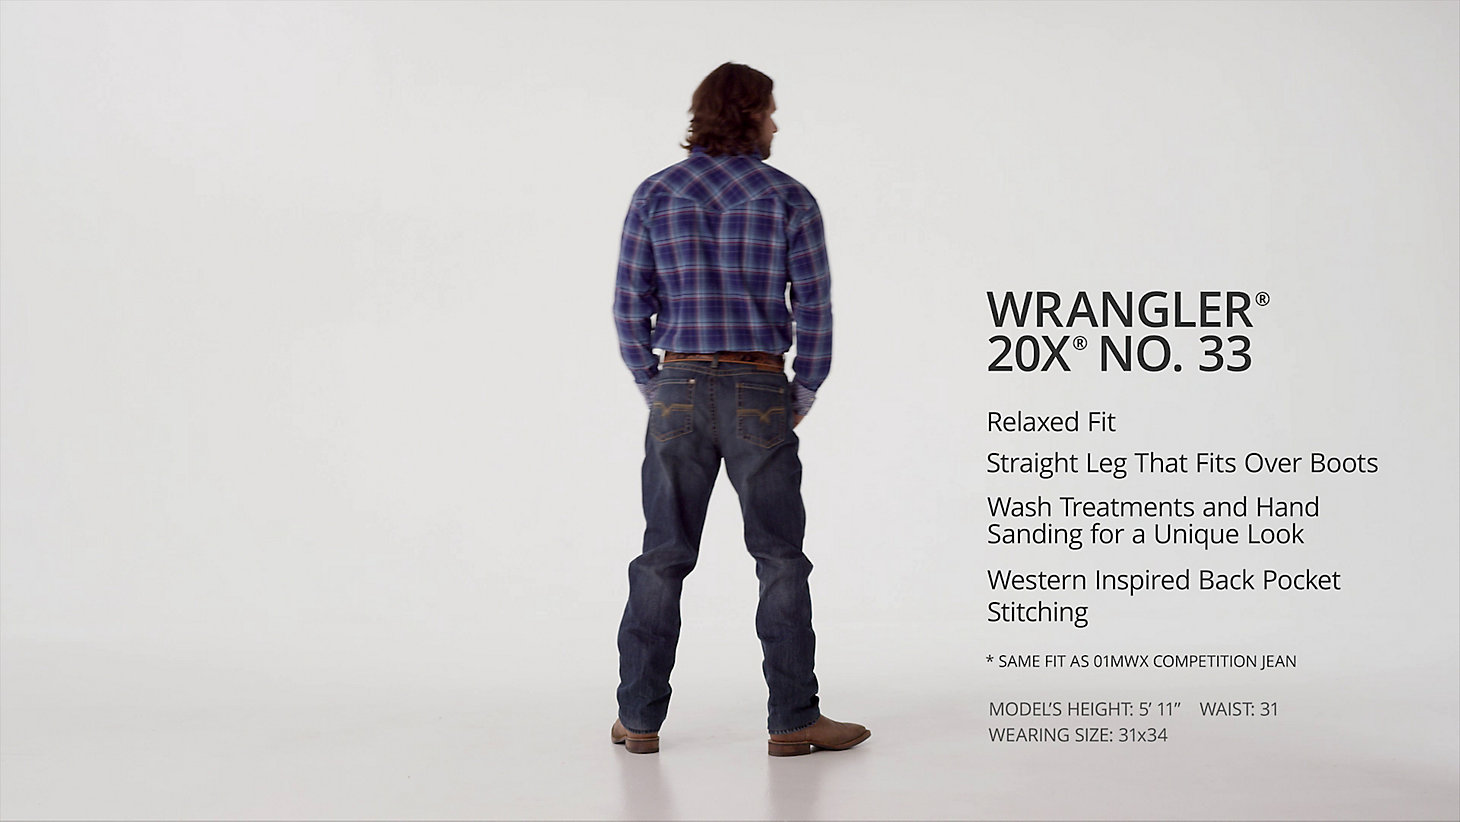 Men's Wrangler® 20X® No. 33 Extreme Relaxed Fit Jean in Wells alternative view 5